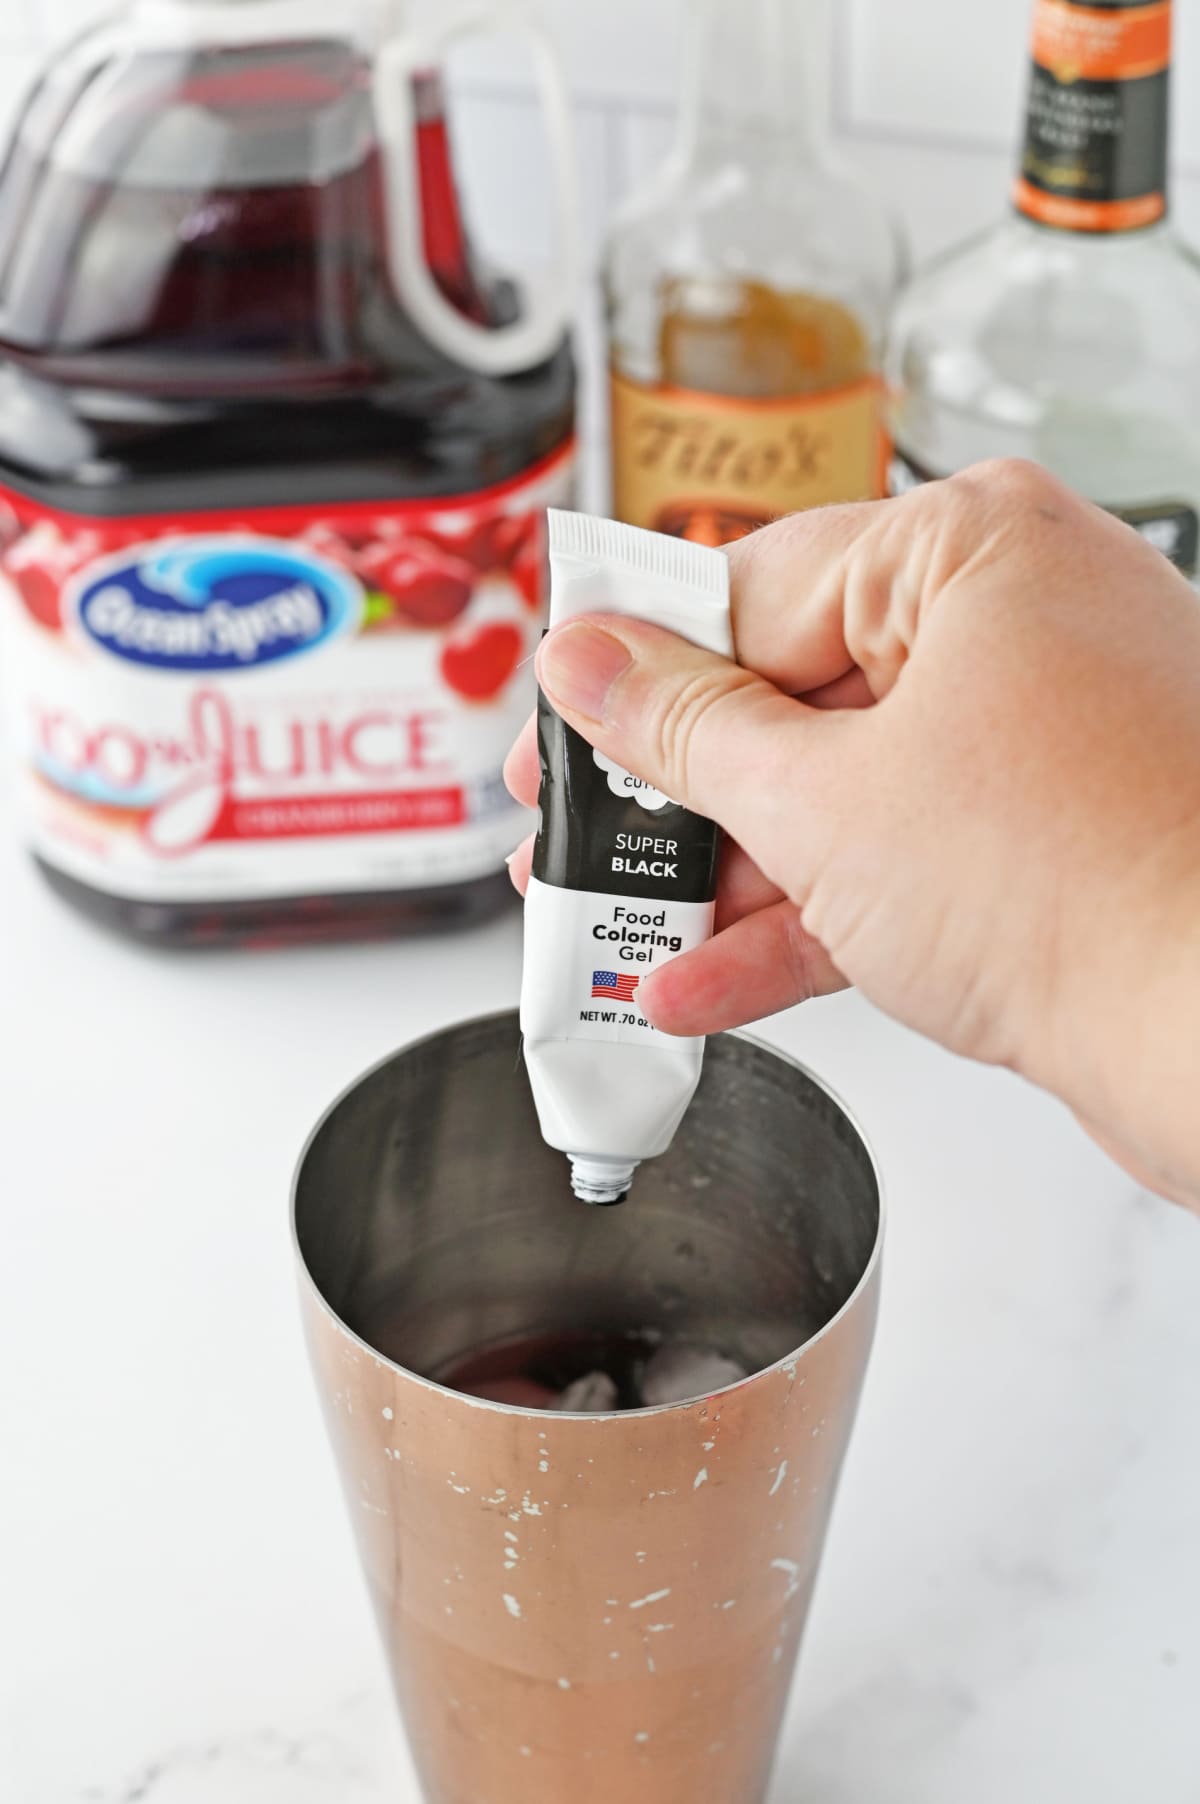 Black coloring gel being dripped into cocktail shaker